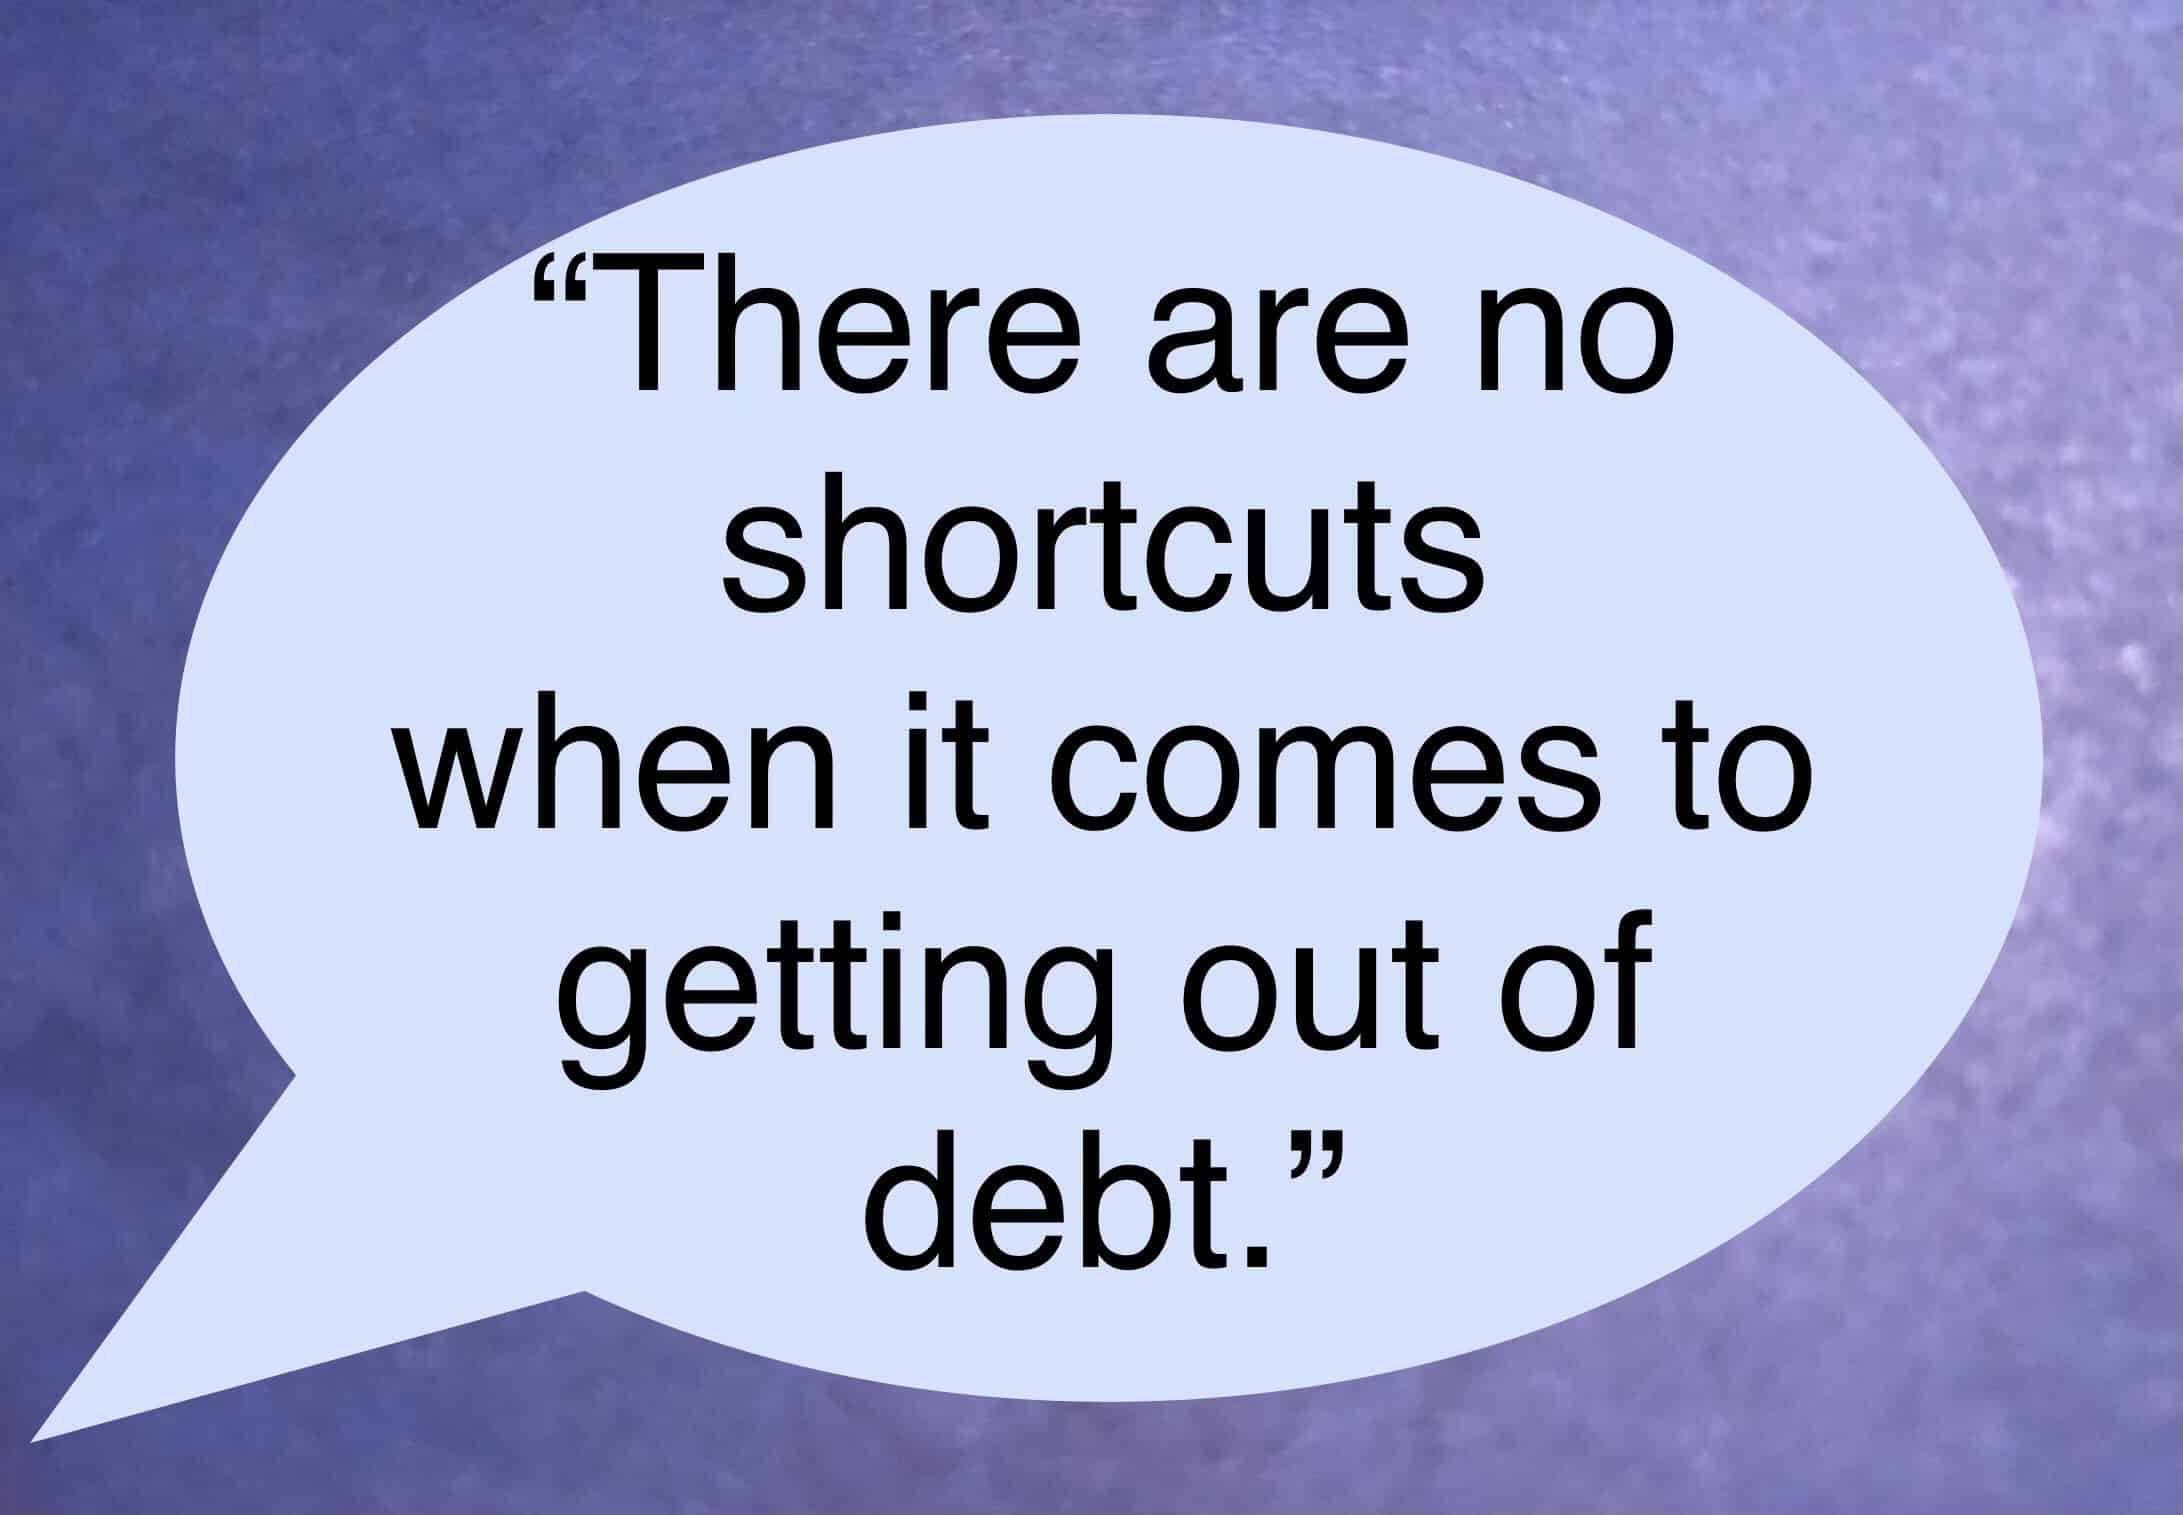 <ul> <li>There are no shortcuts when it comes to getting out of debt. -Dave Ramsey</li> </ul> <p>Agree with this? Hit the Thumbs Up button above. Disagree? Let us know in the comments with what you'd change.</p>